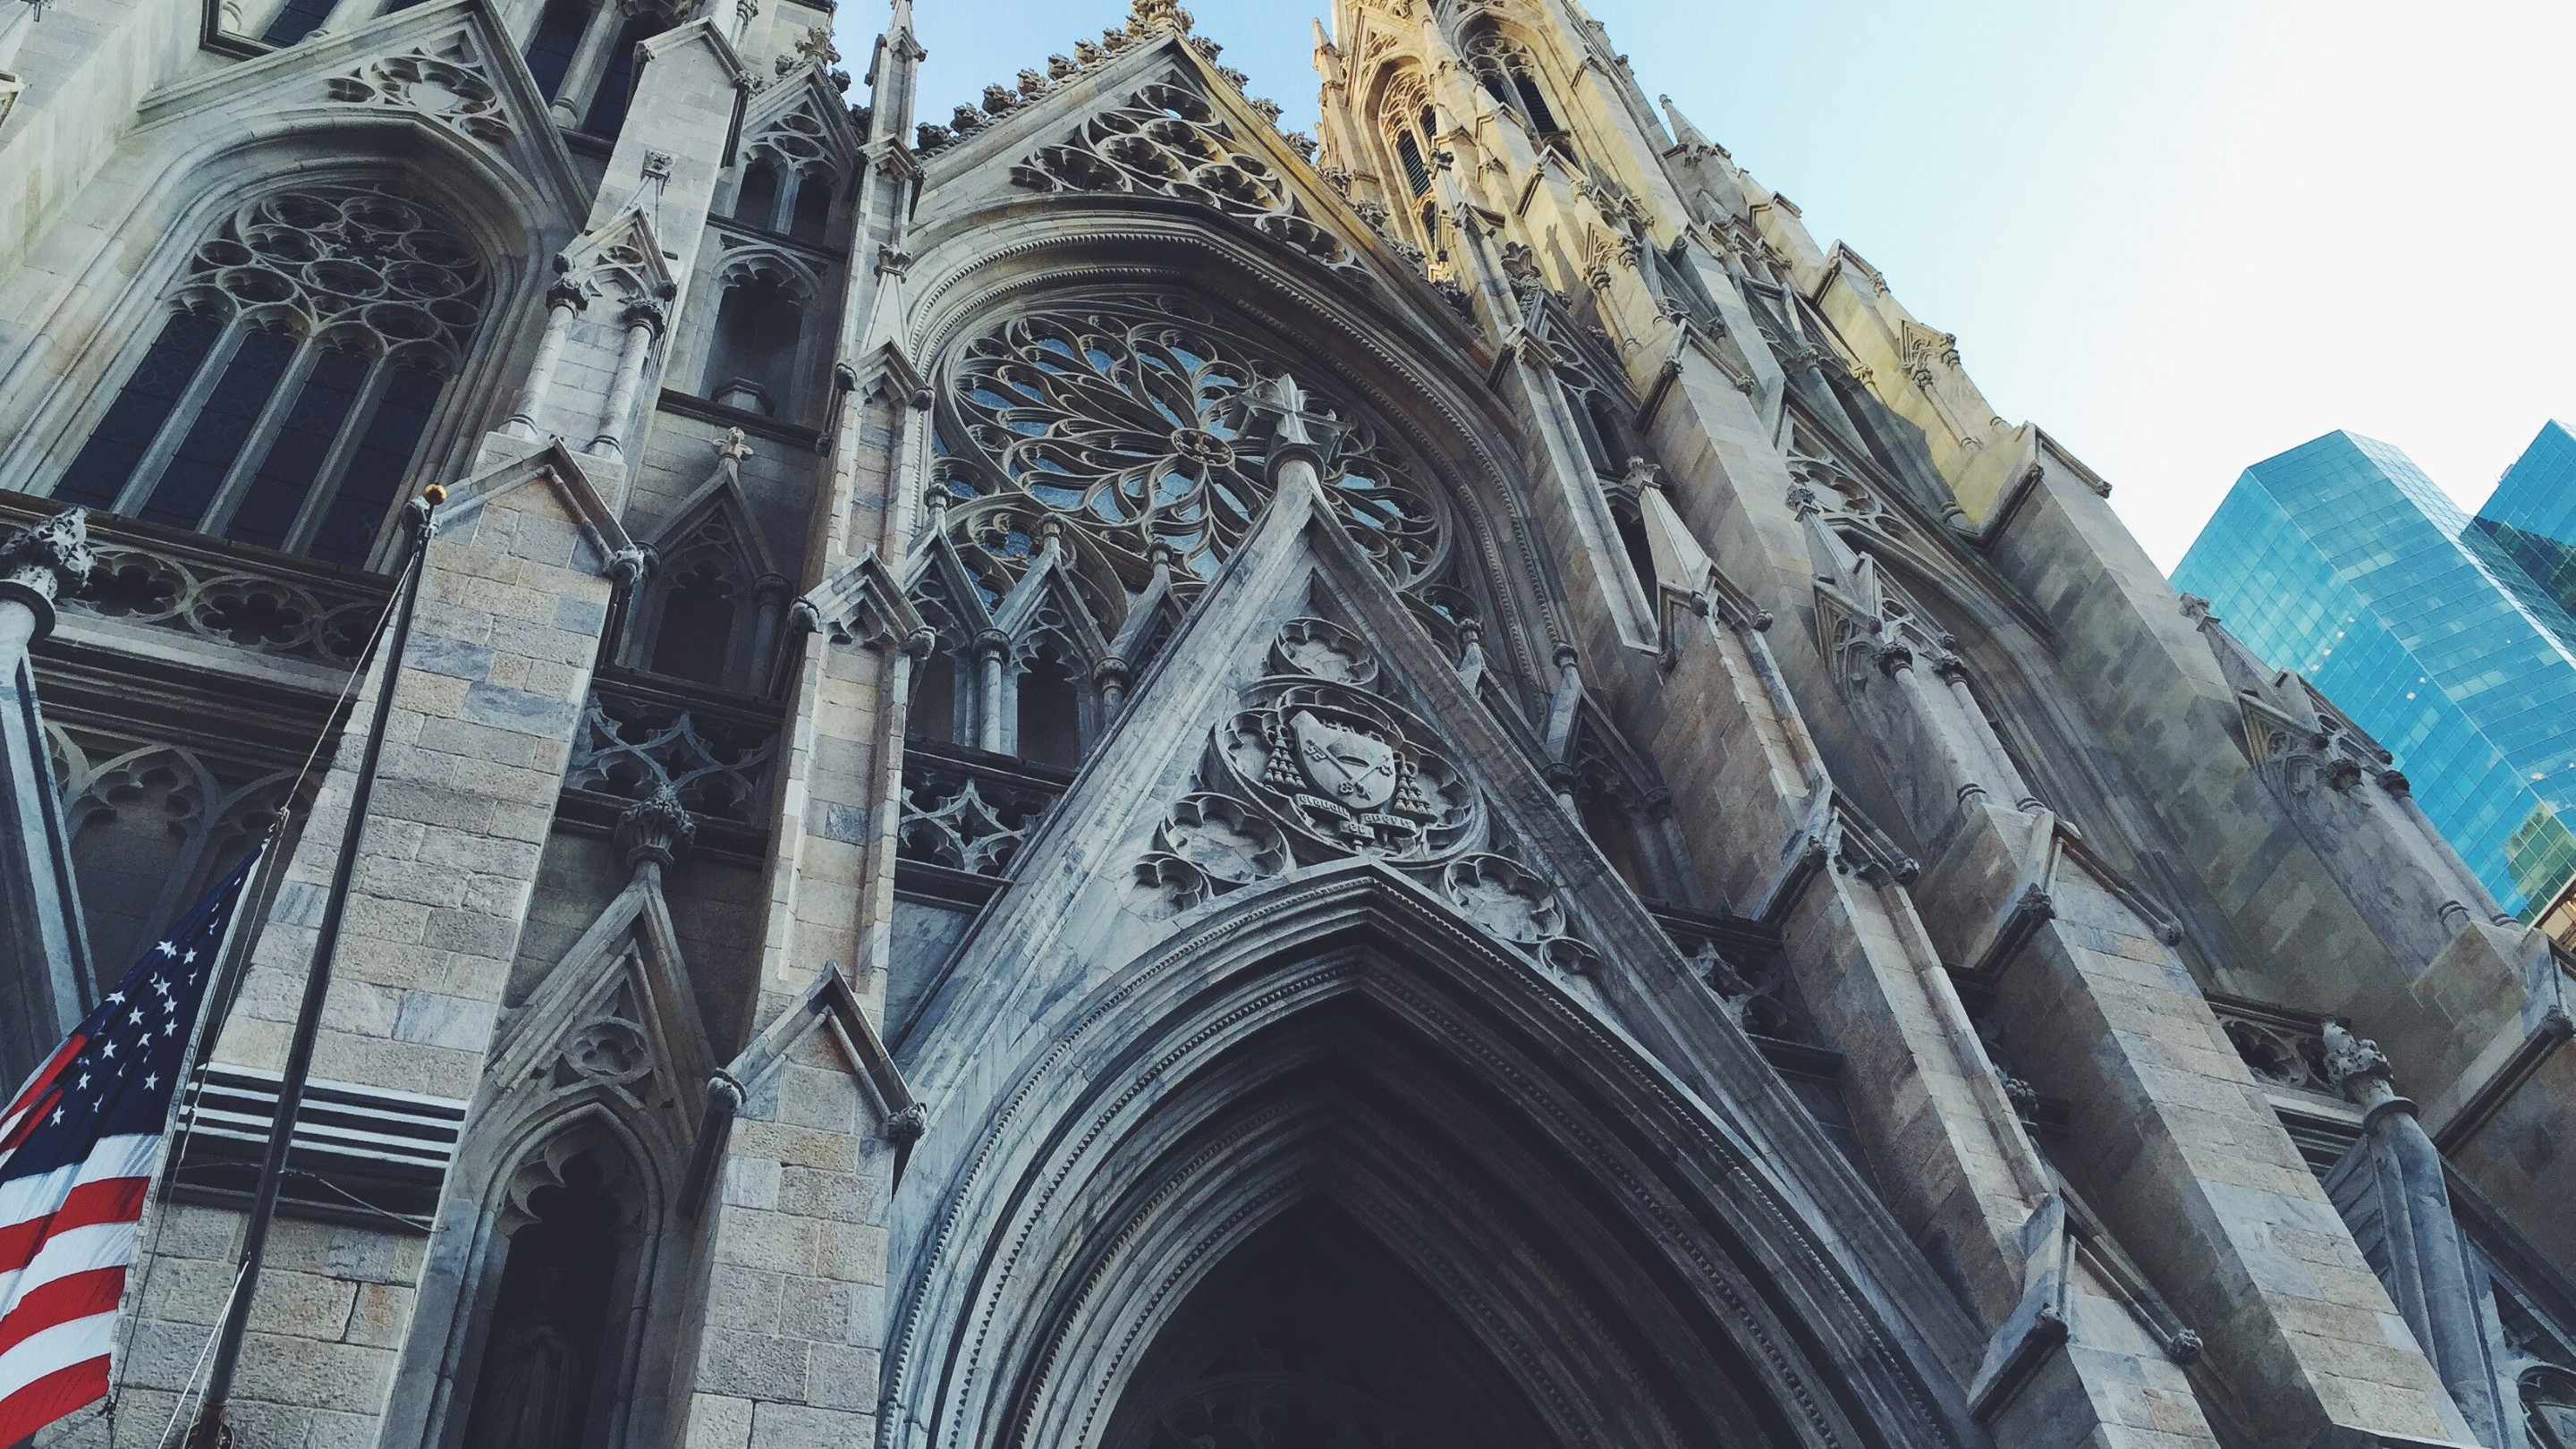 St. Patrick's Cathedral in New York wallpaper 2880x1620